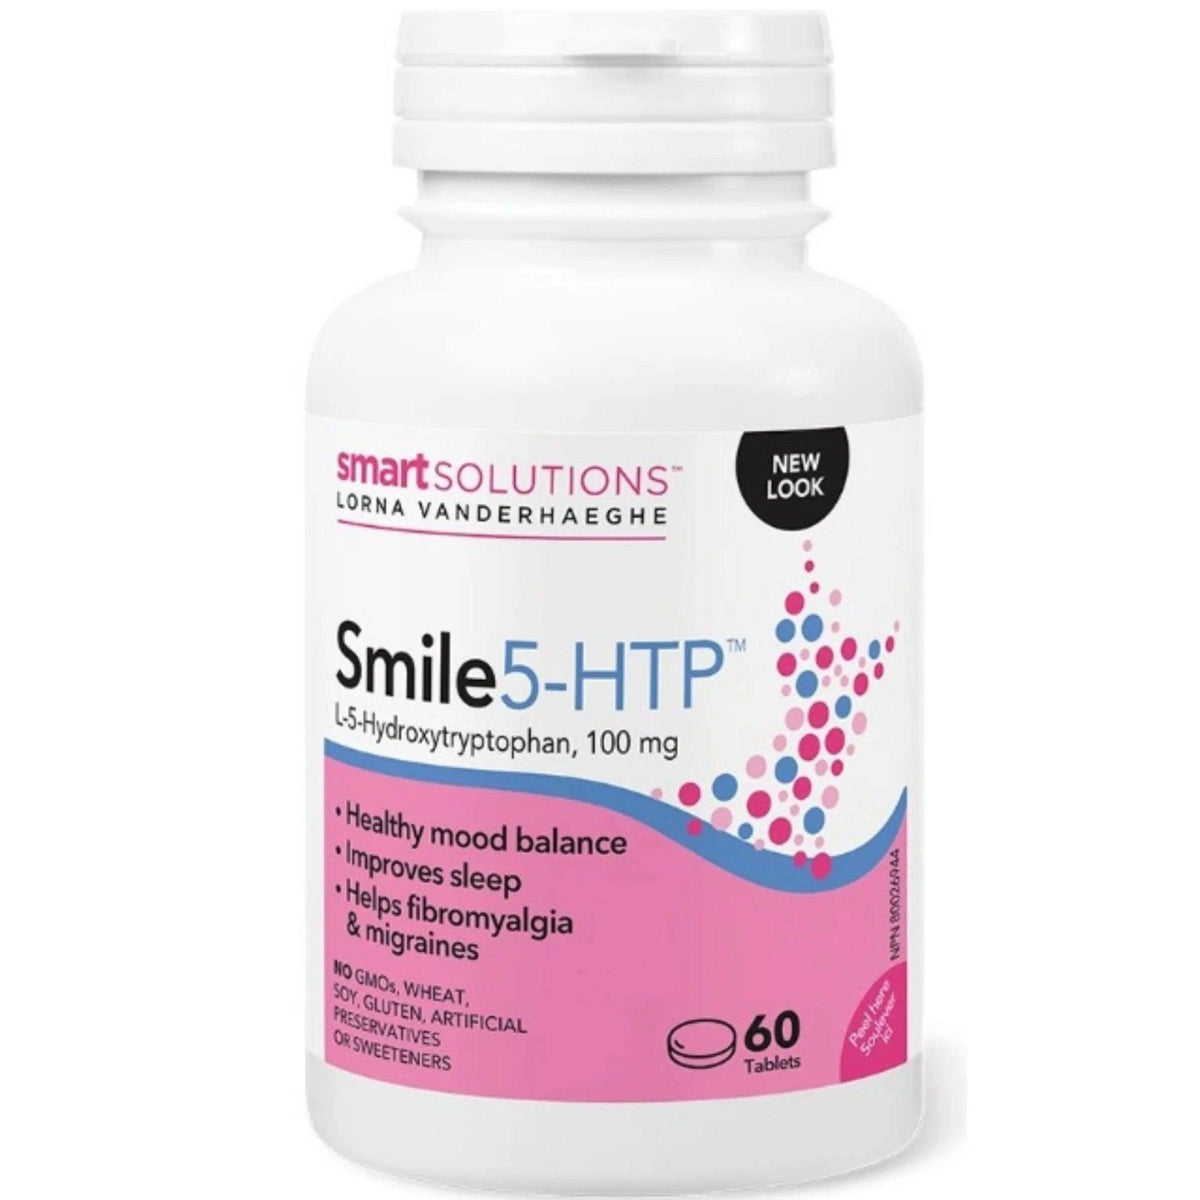 Smart Solutions Smile 5-HTP 60 Tabs Supplements - Stress at Village Vitamin Store